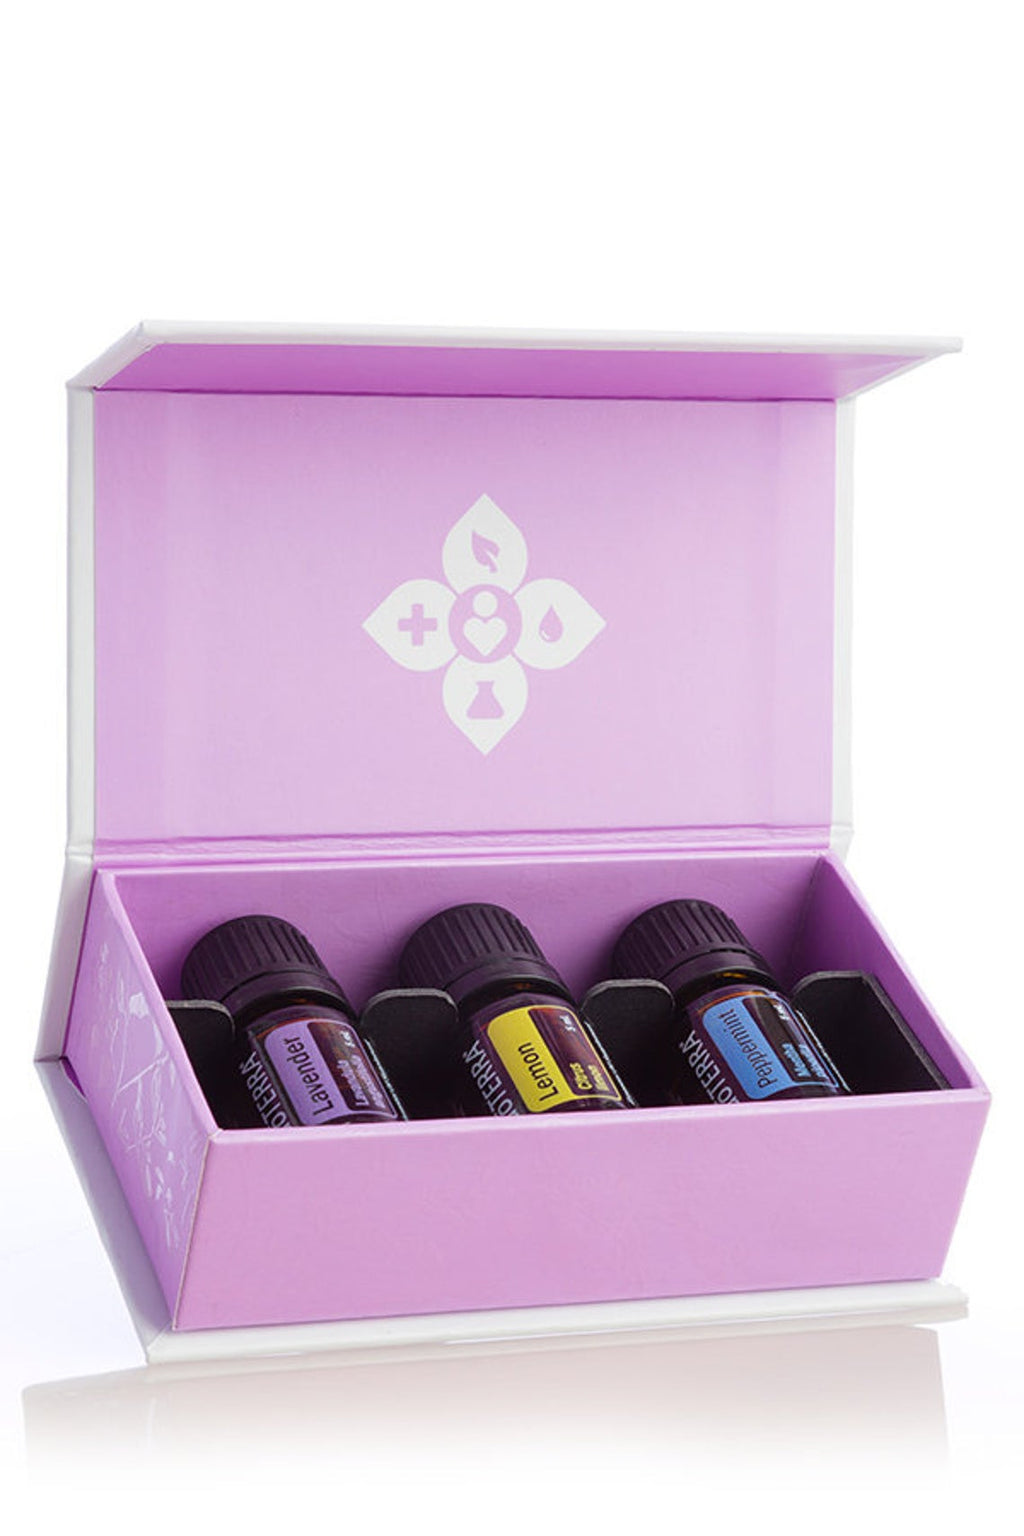 Doterra Essential Oils - Introductory kit